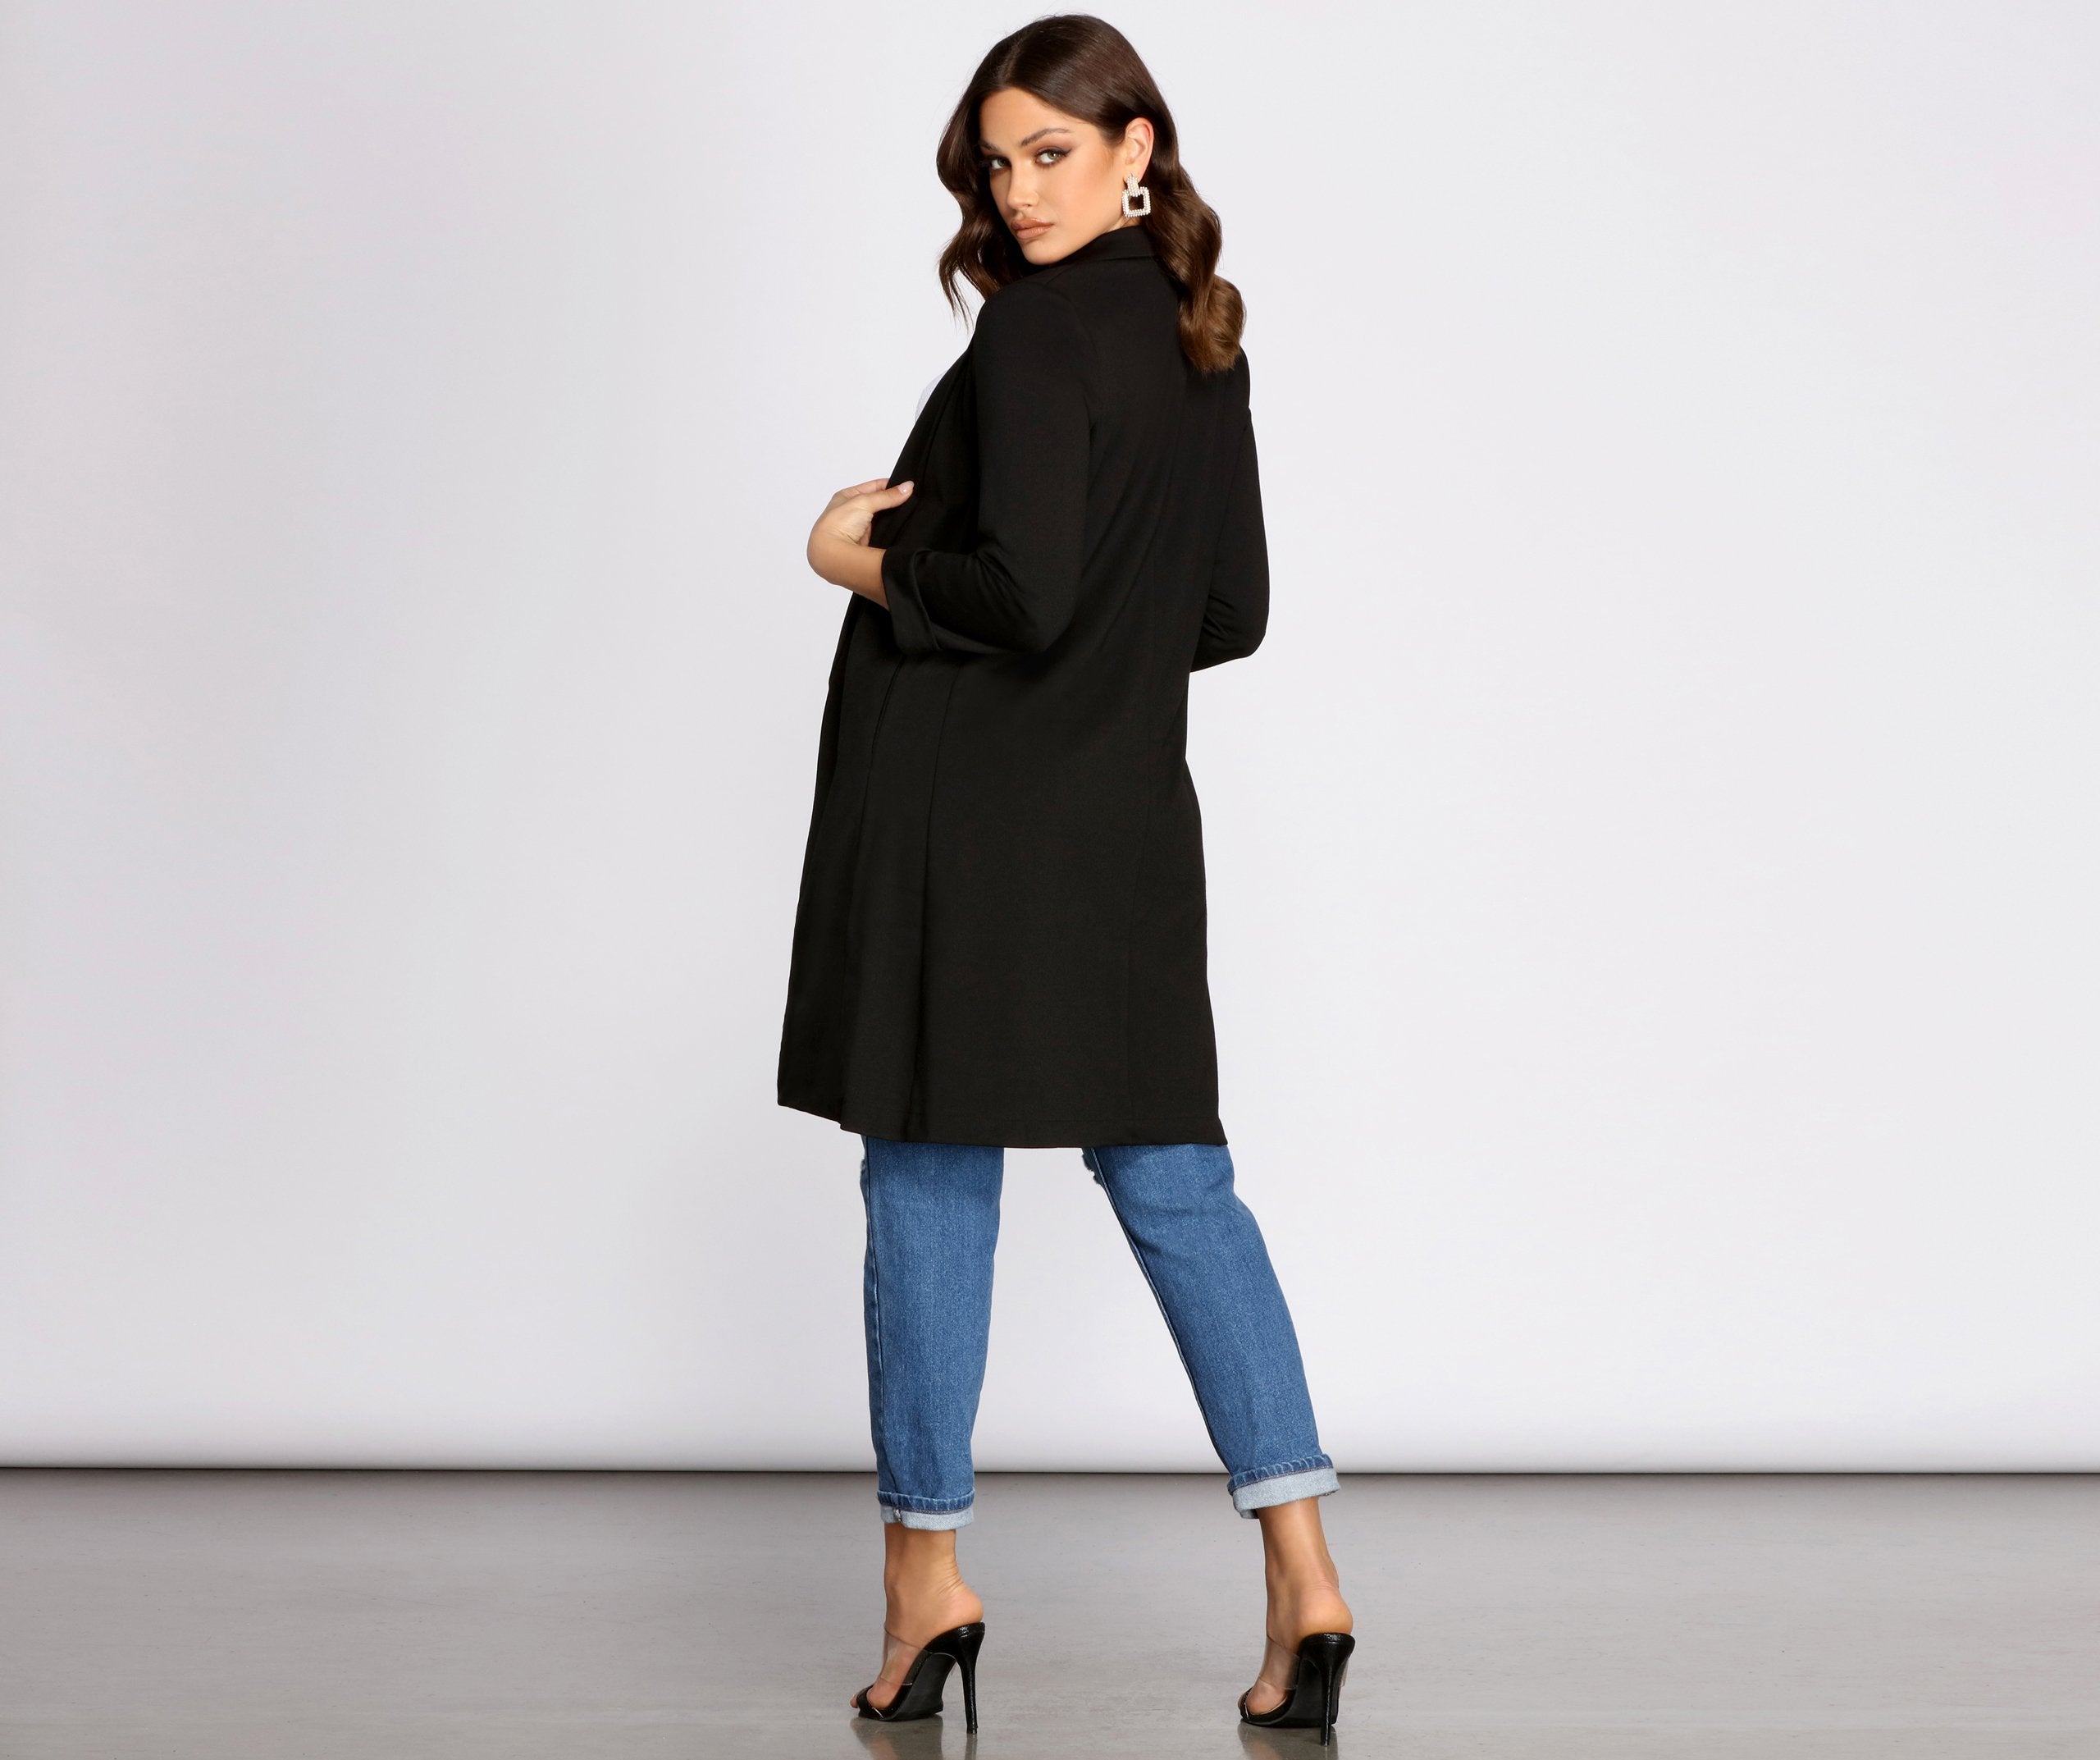 Makin' Major Moves Long Line Blazer - Lady Occasions